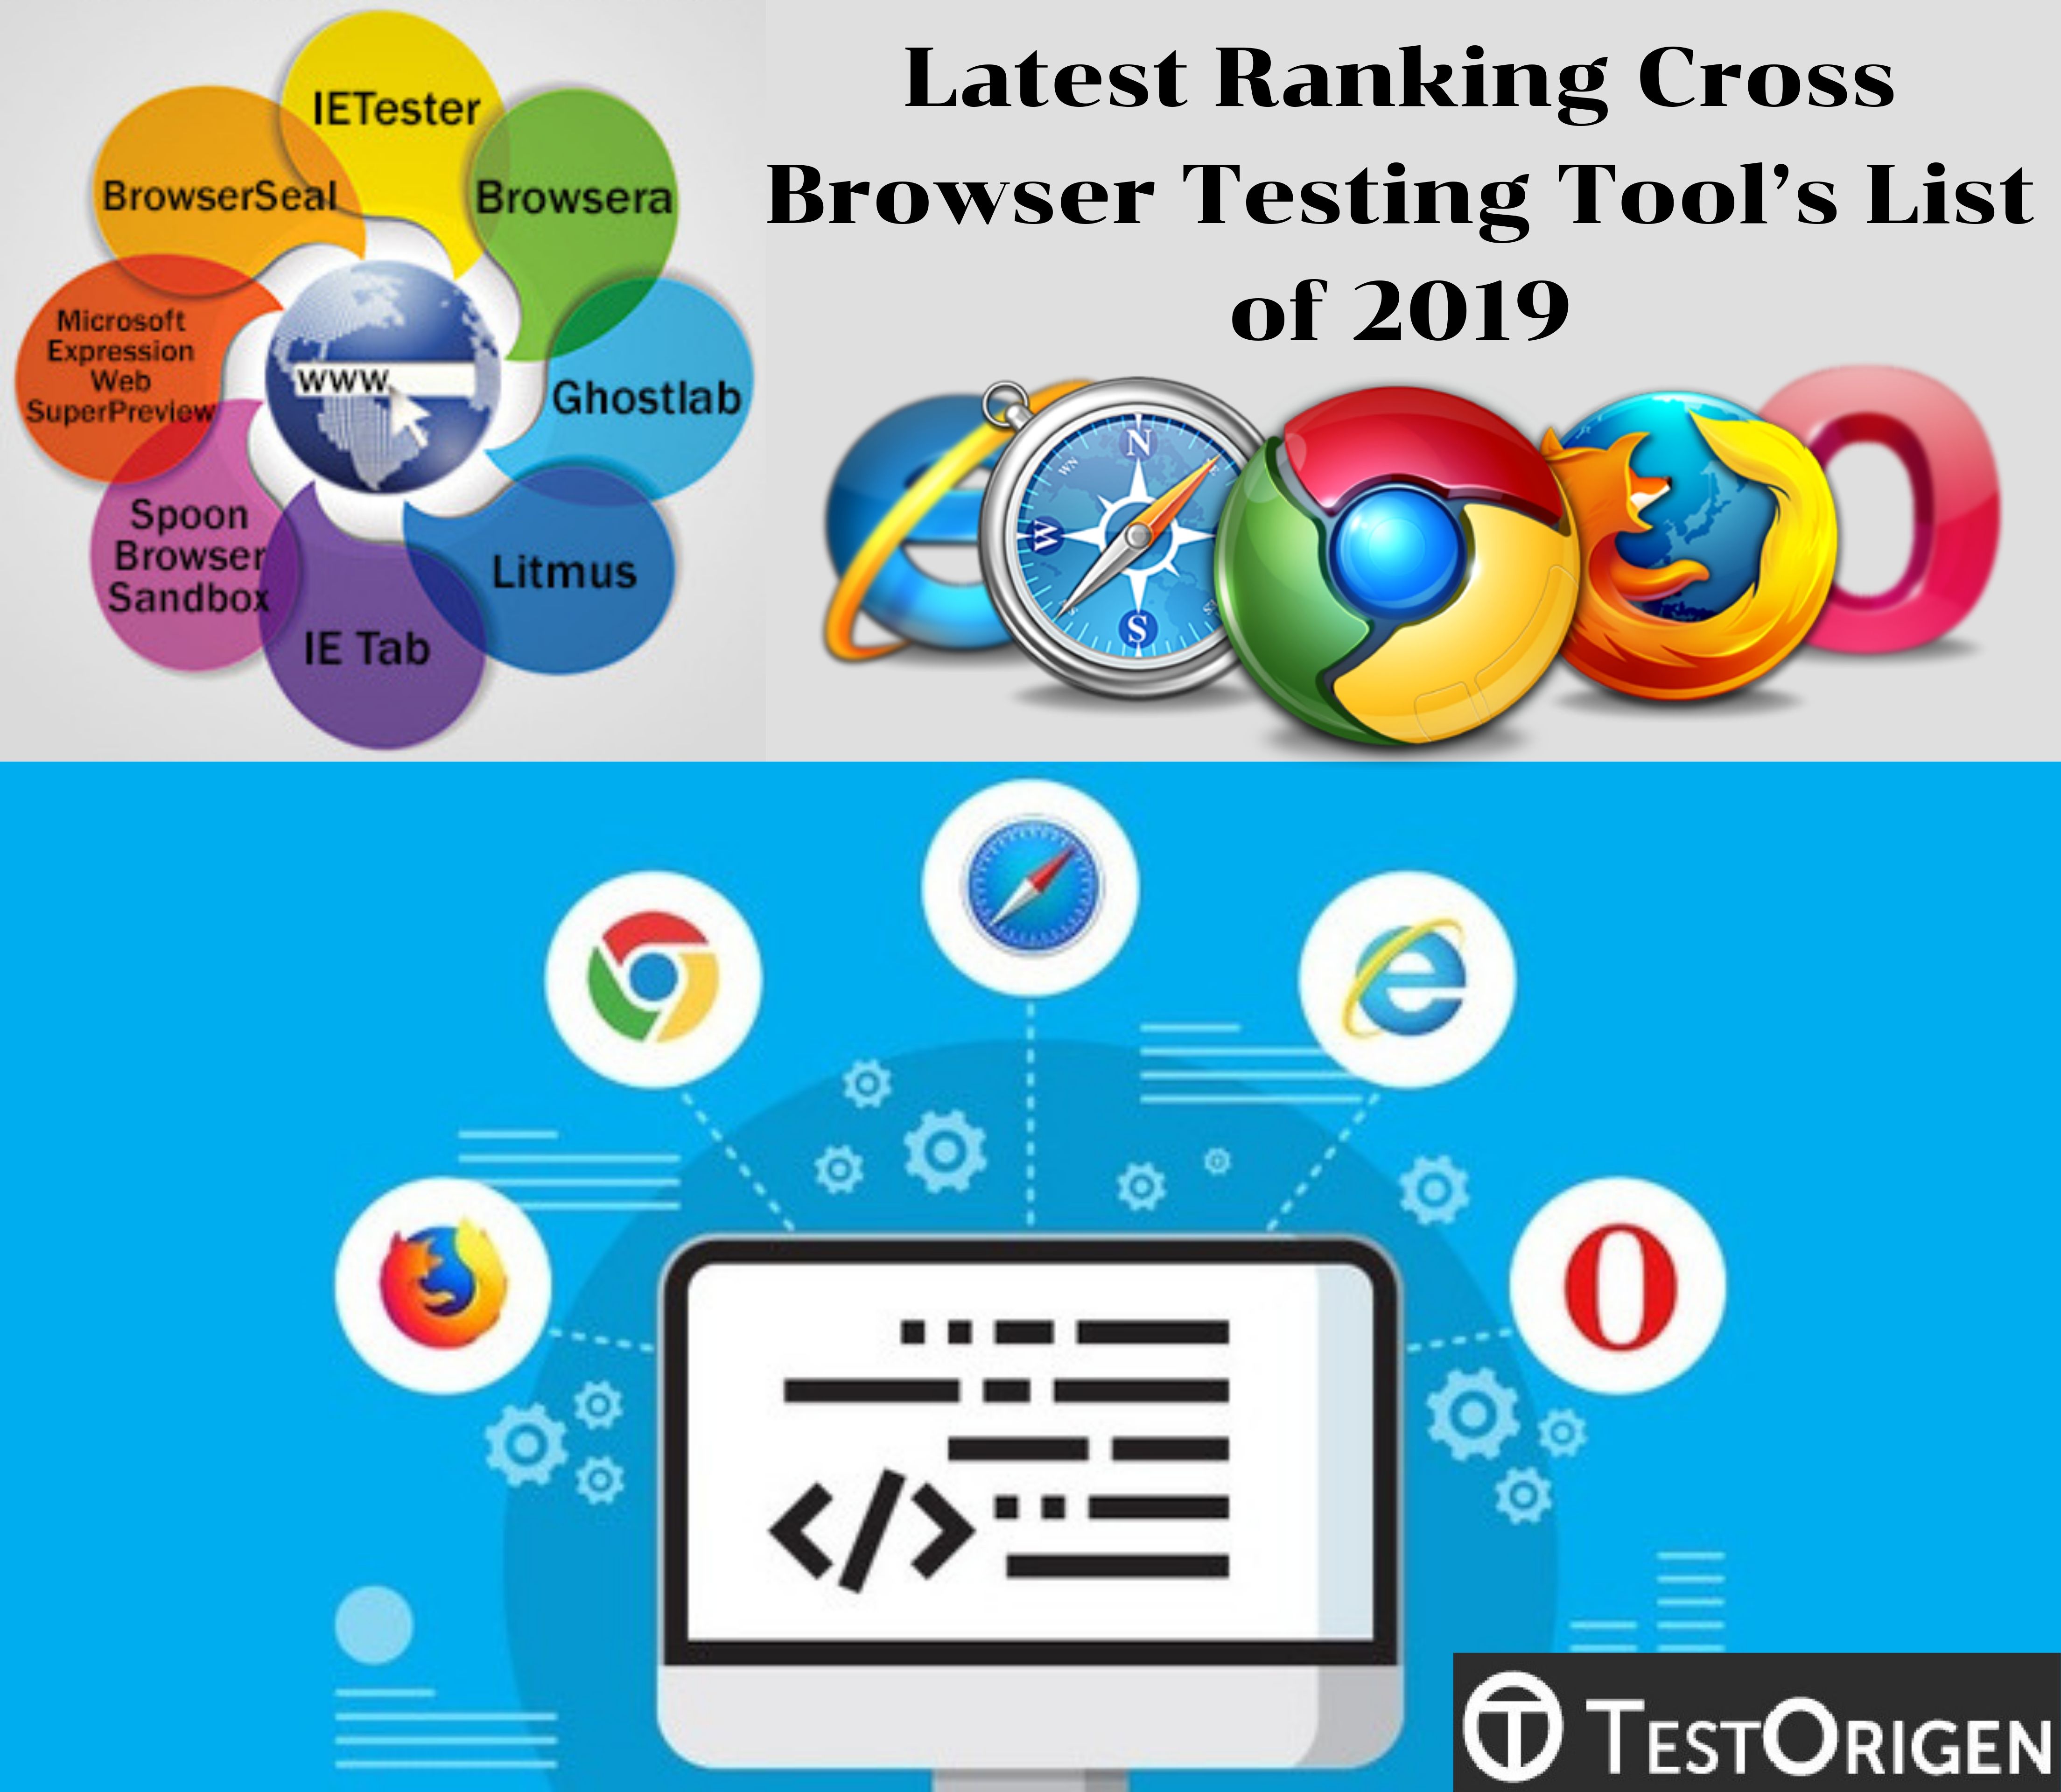 Latest Ranking Cross Browser Testing Tools List of 2019